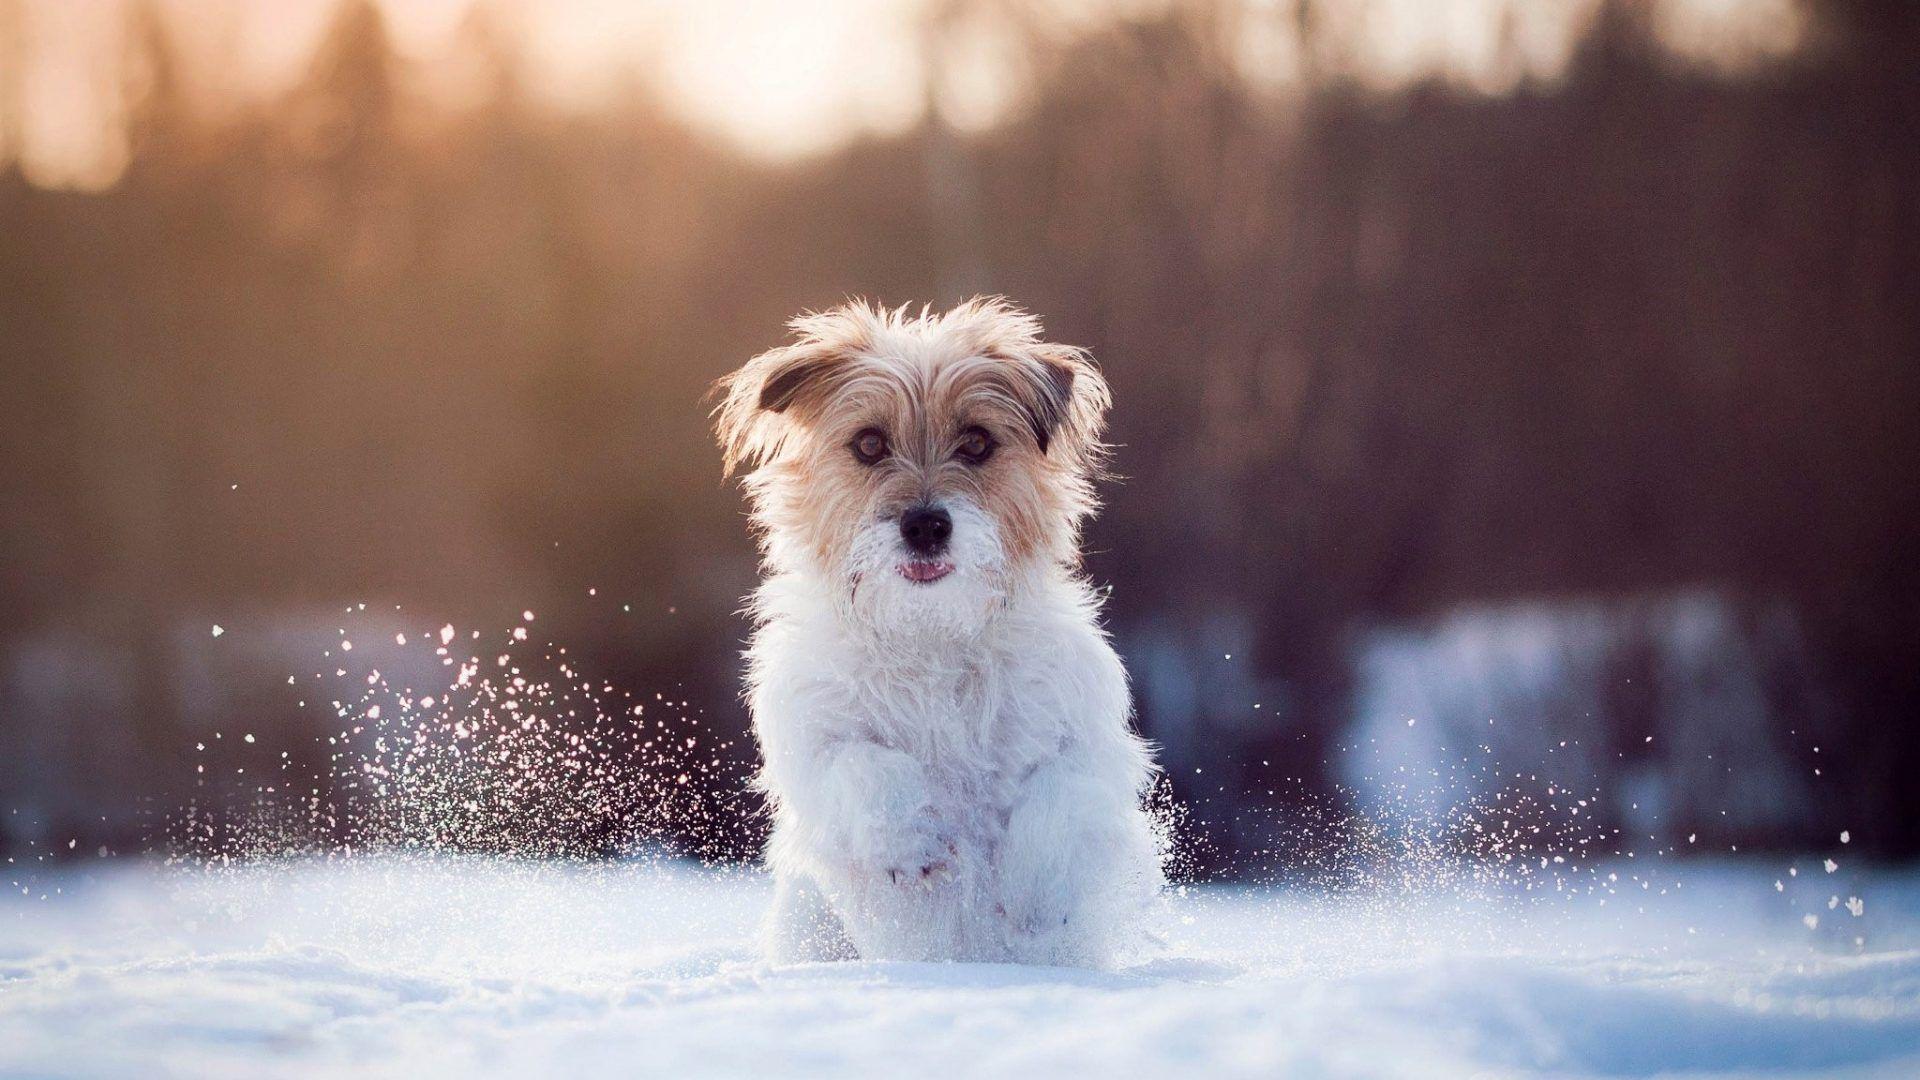 Dog In Snow Wallpapers Wallpaper Cave